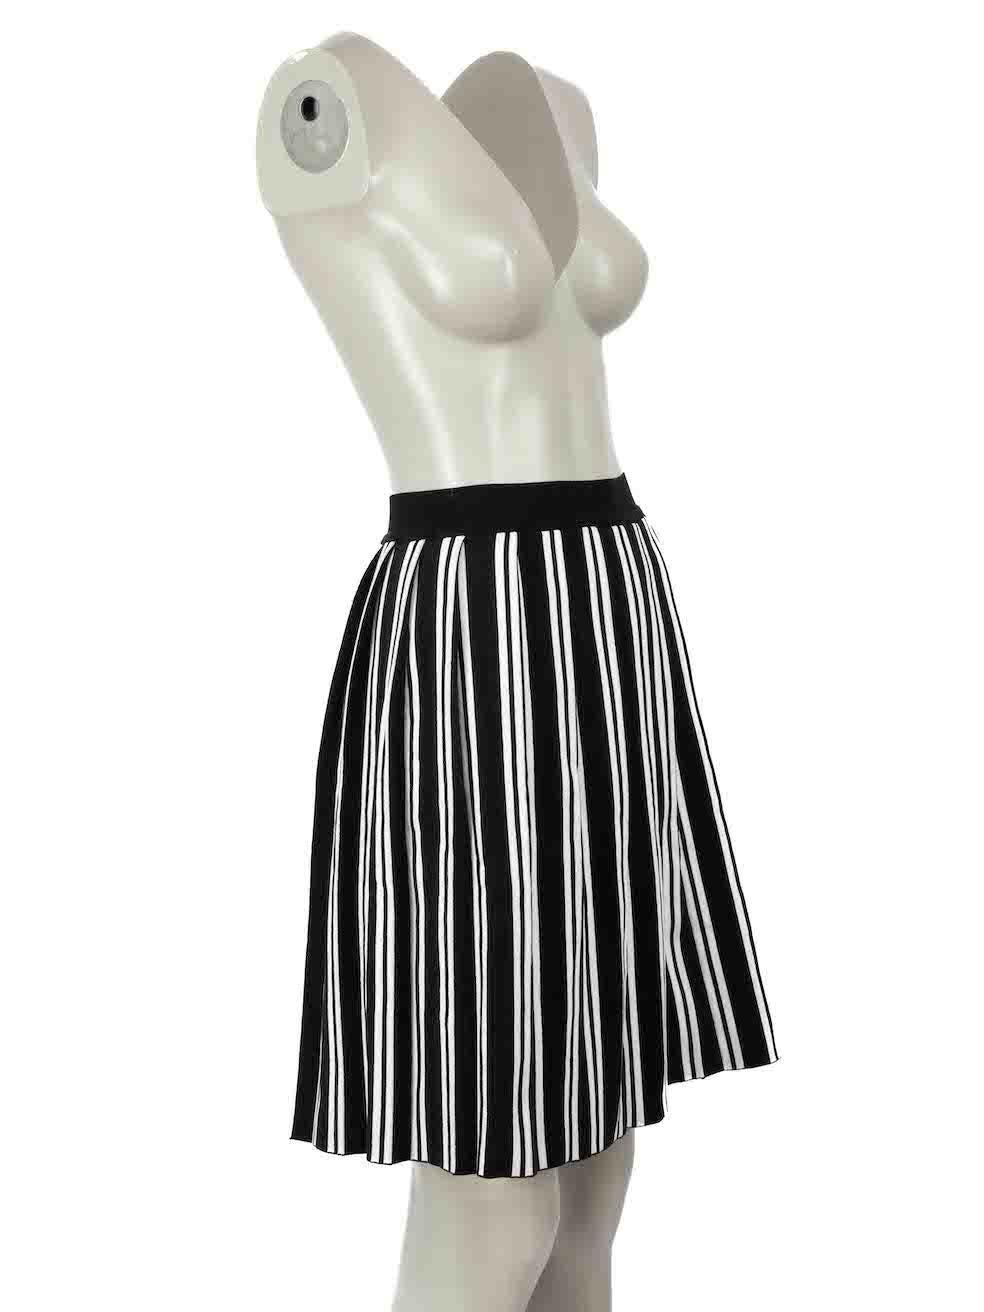 CONDITION is Very good. Hardly any visible wear to skirt is evident on this used Balenciaga designer resale item.
 
Details
Black and white
Cotton
Skirt
Striped pattern
Side open seam
Elasticated waistband
Knitted
 
Made in Italy
 
Composition
39%